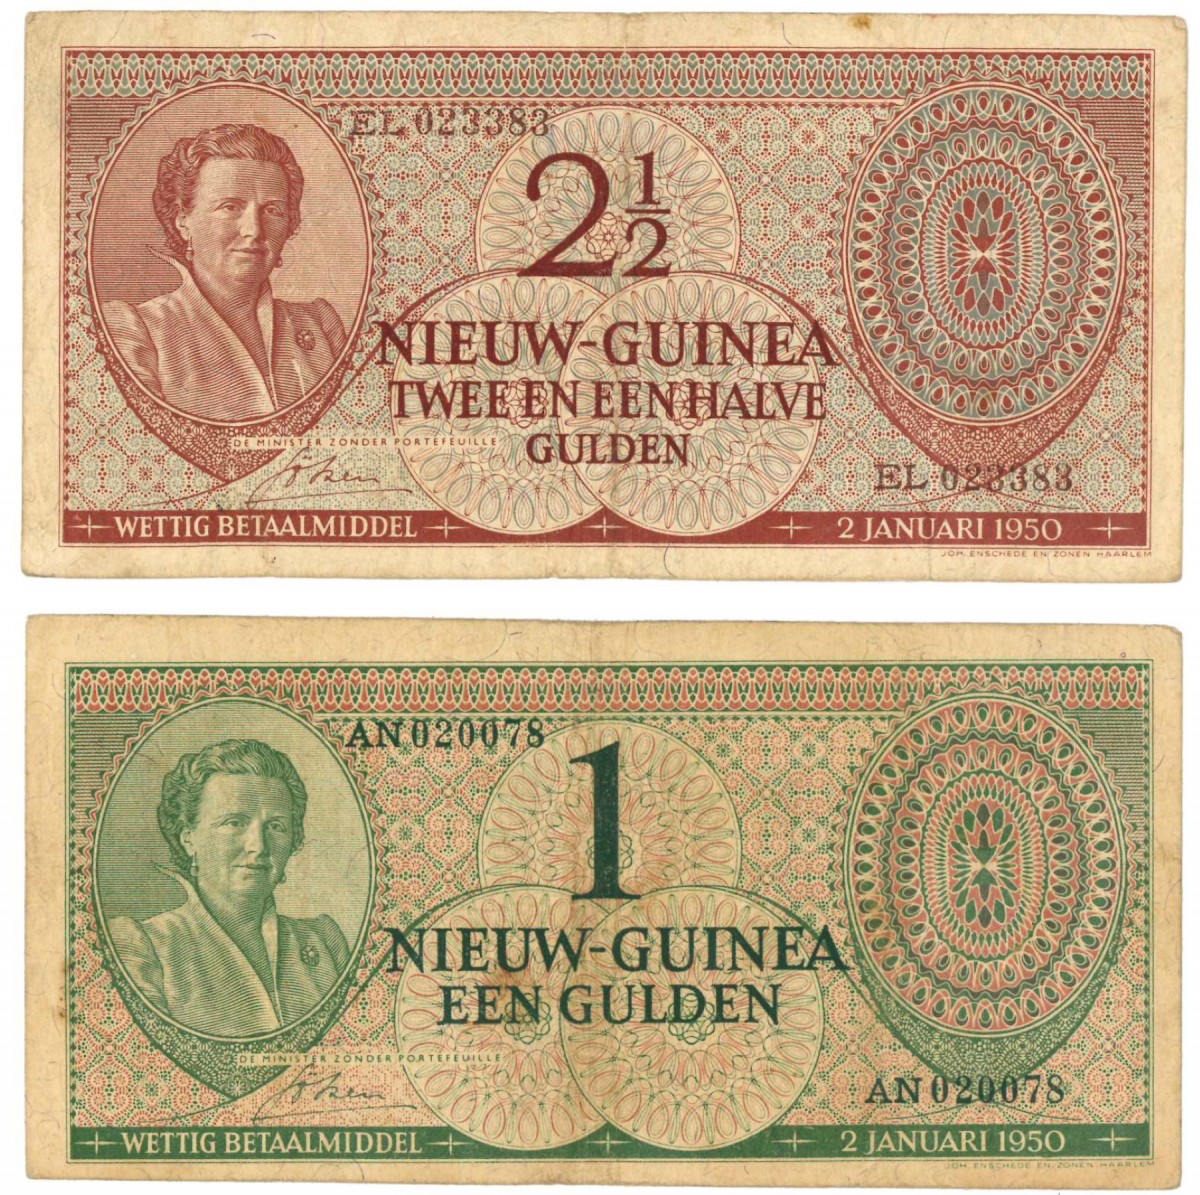 New Guinea 1 and 2½ gulden Banknote Type 1950 - Very fine -